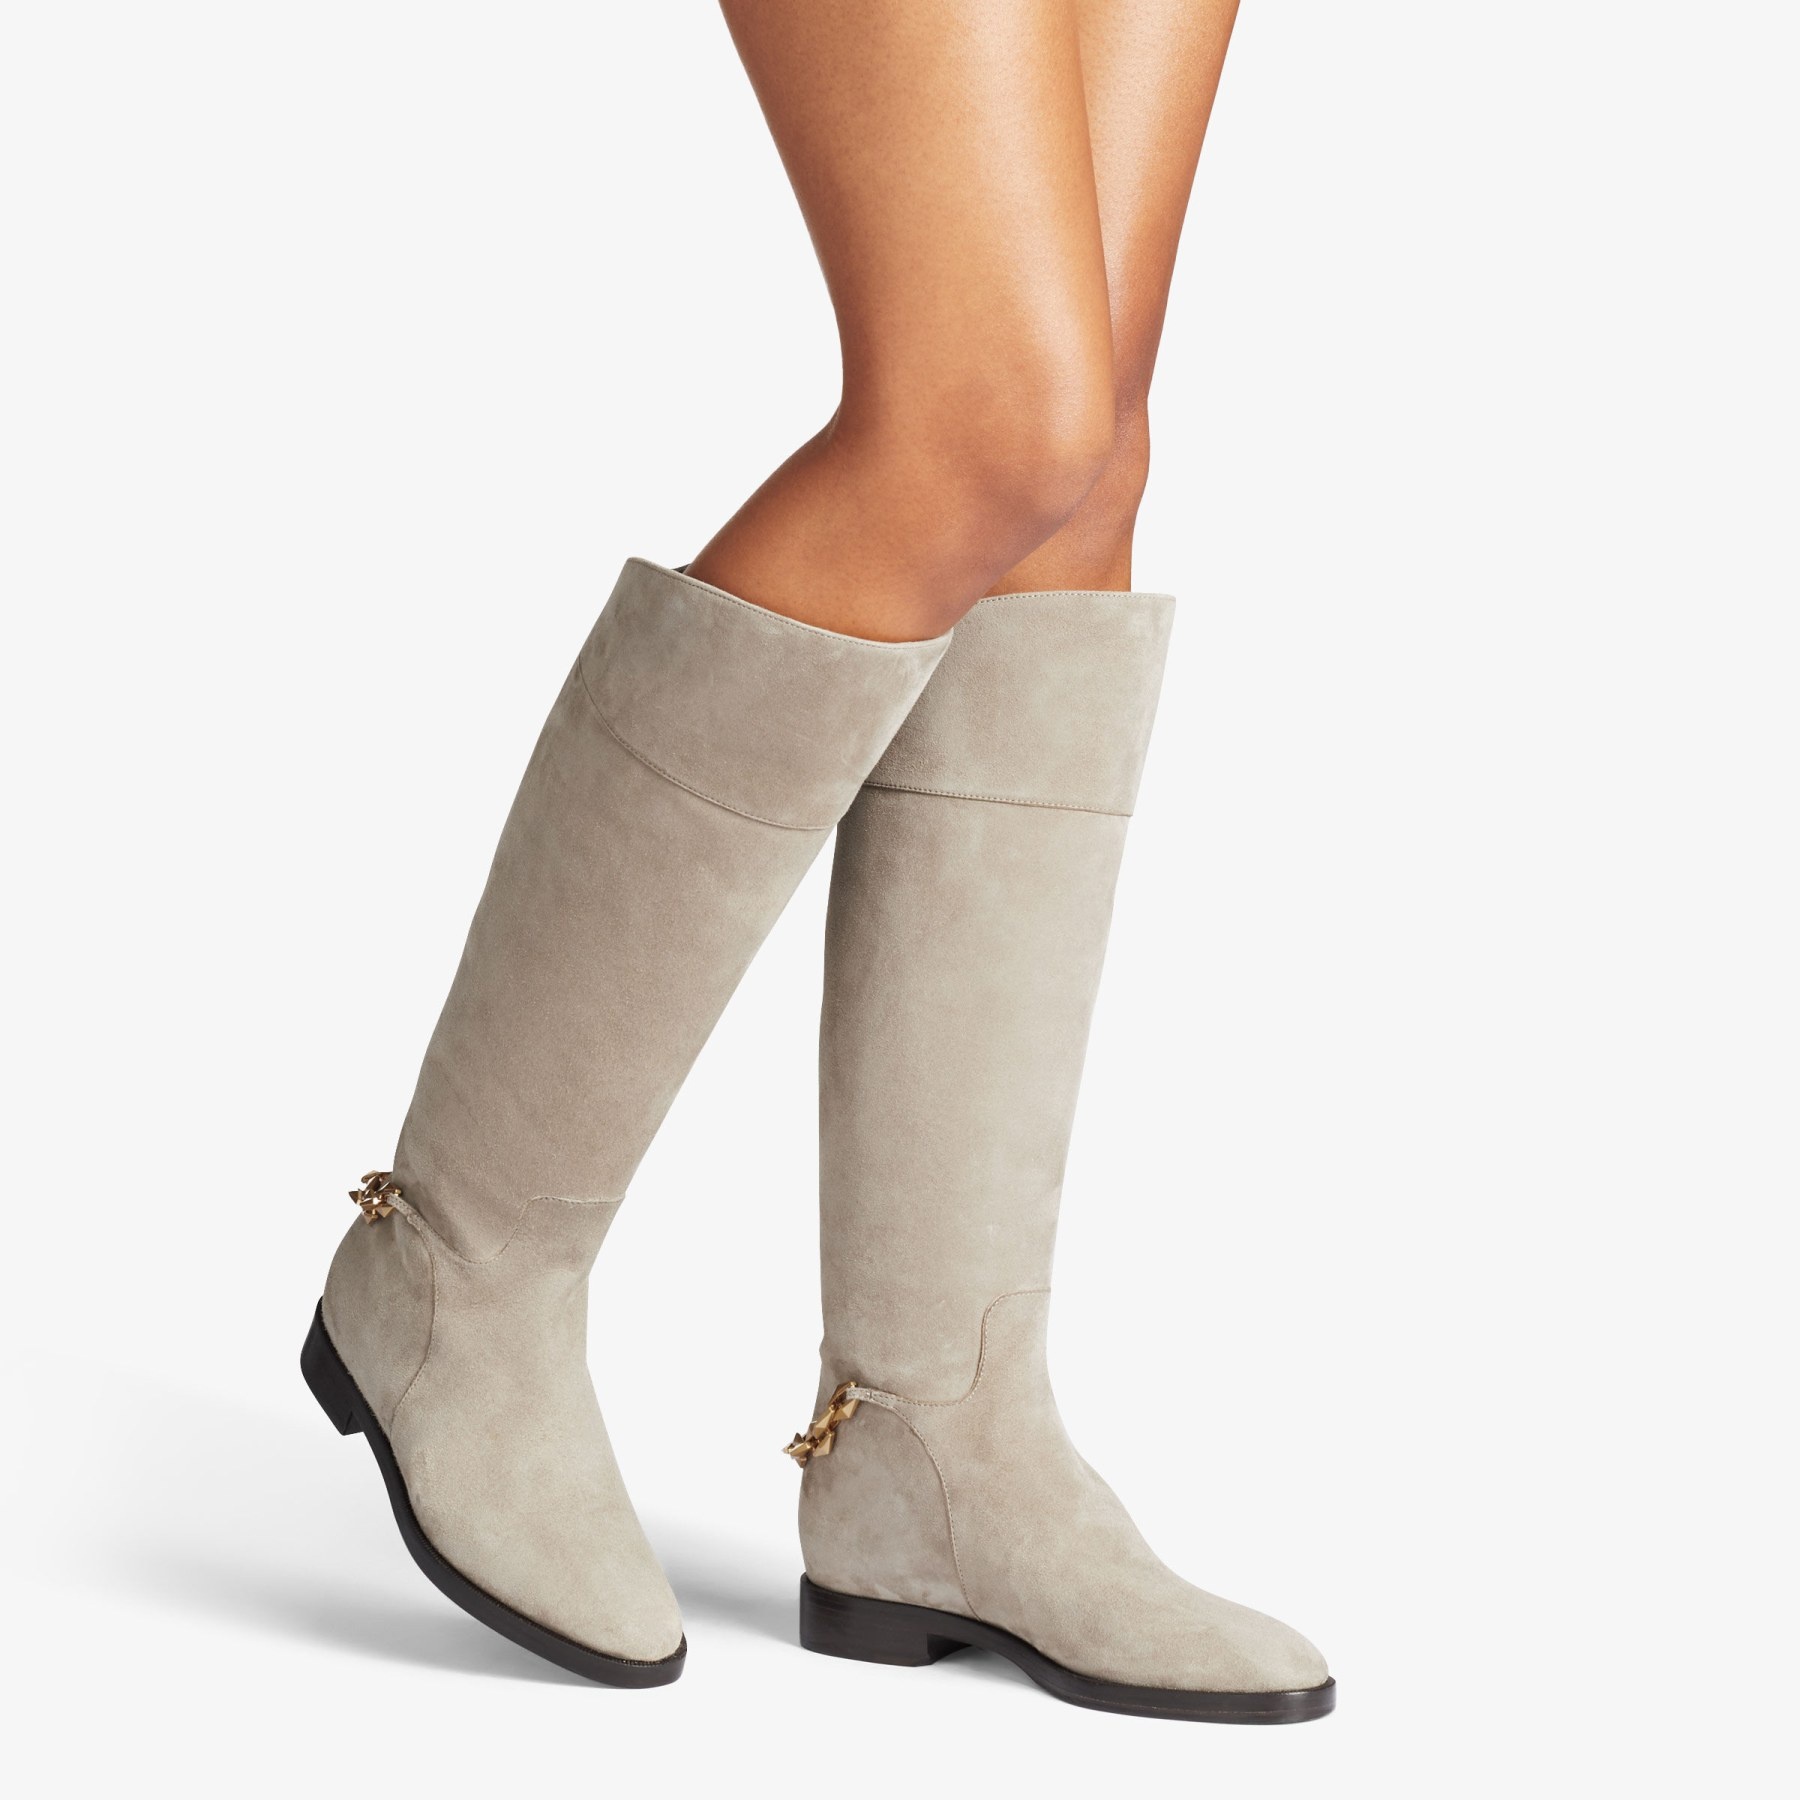 Nell Knee Boot Flat
Taupe Suede Knee-High Boots with Chain - 2